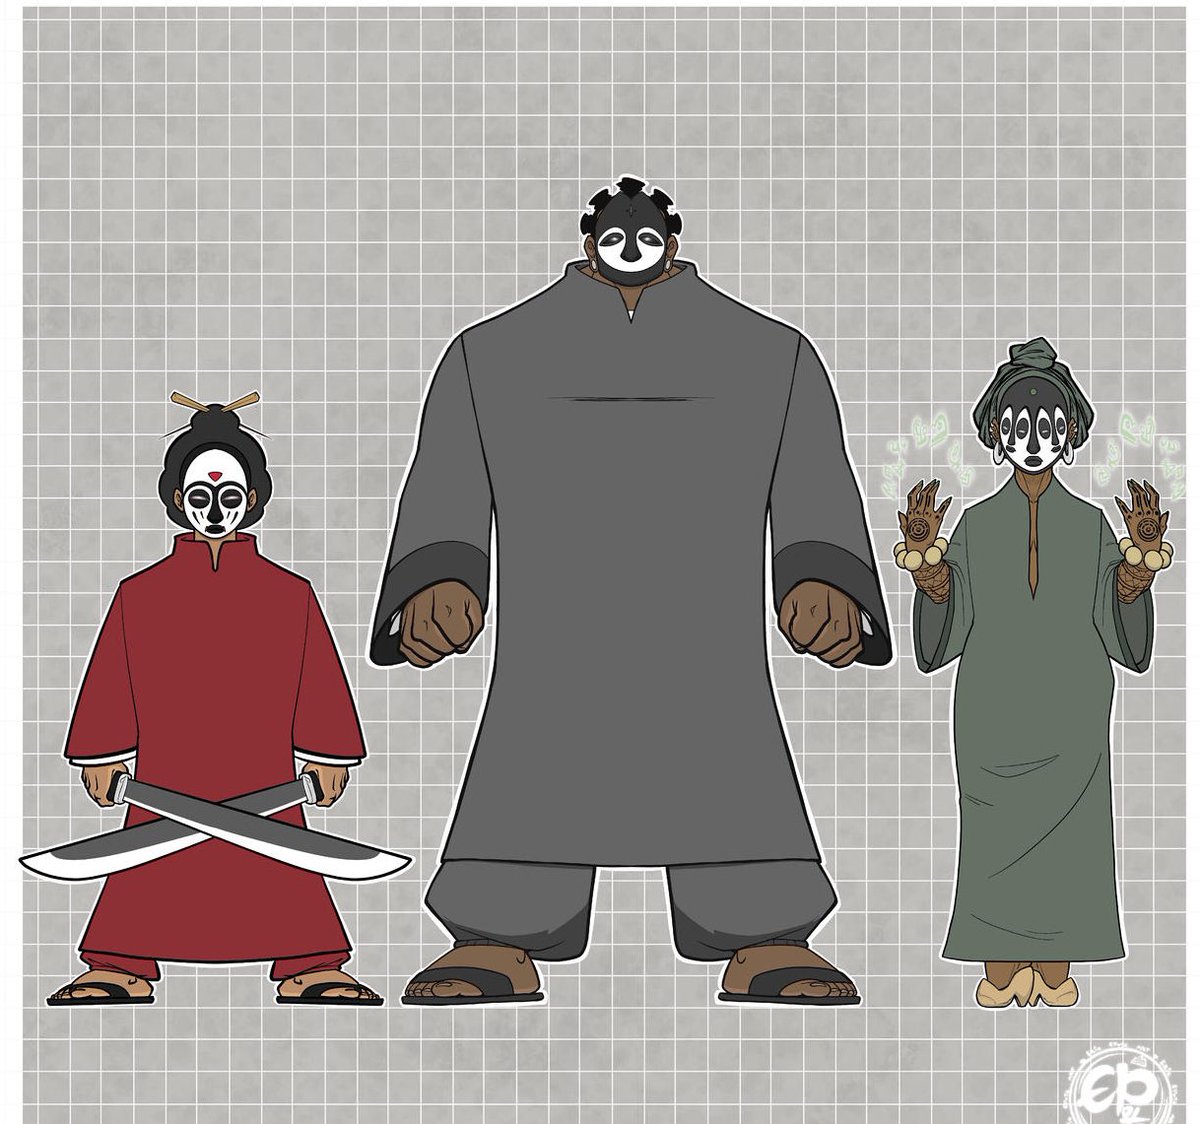 'A2D'

Three masked vigilantes wearing traditional masks from Cameroon and named after Cameroonian food

A random idea from last year
#tbt
__
#artist #drawing #characterdesign #masks #maskedvigilante #theafricanwayknaanvoice